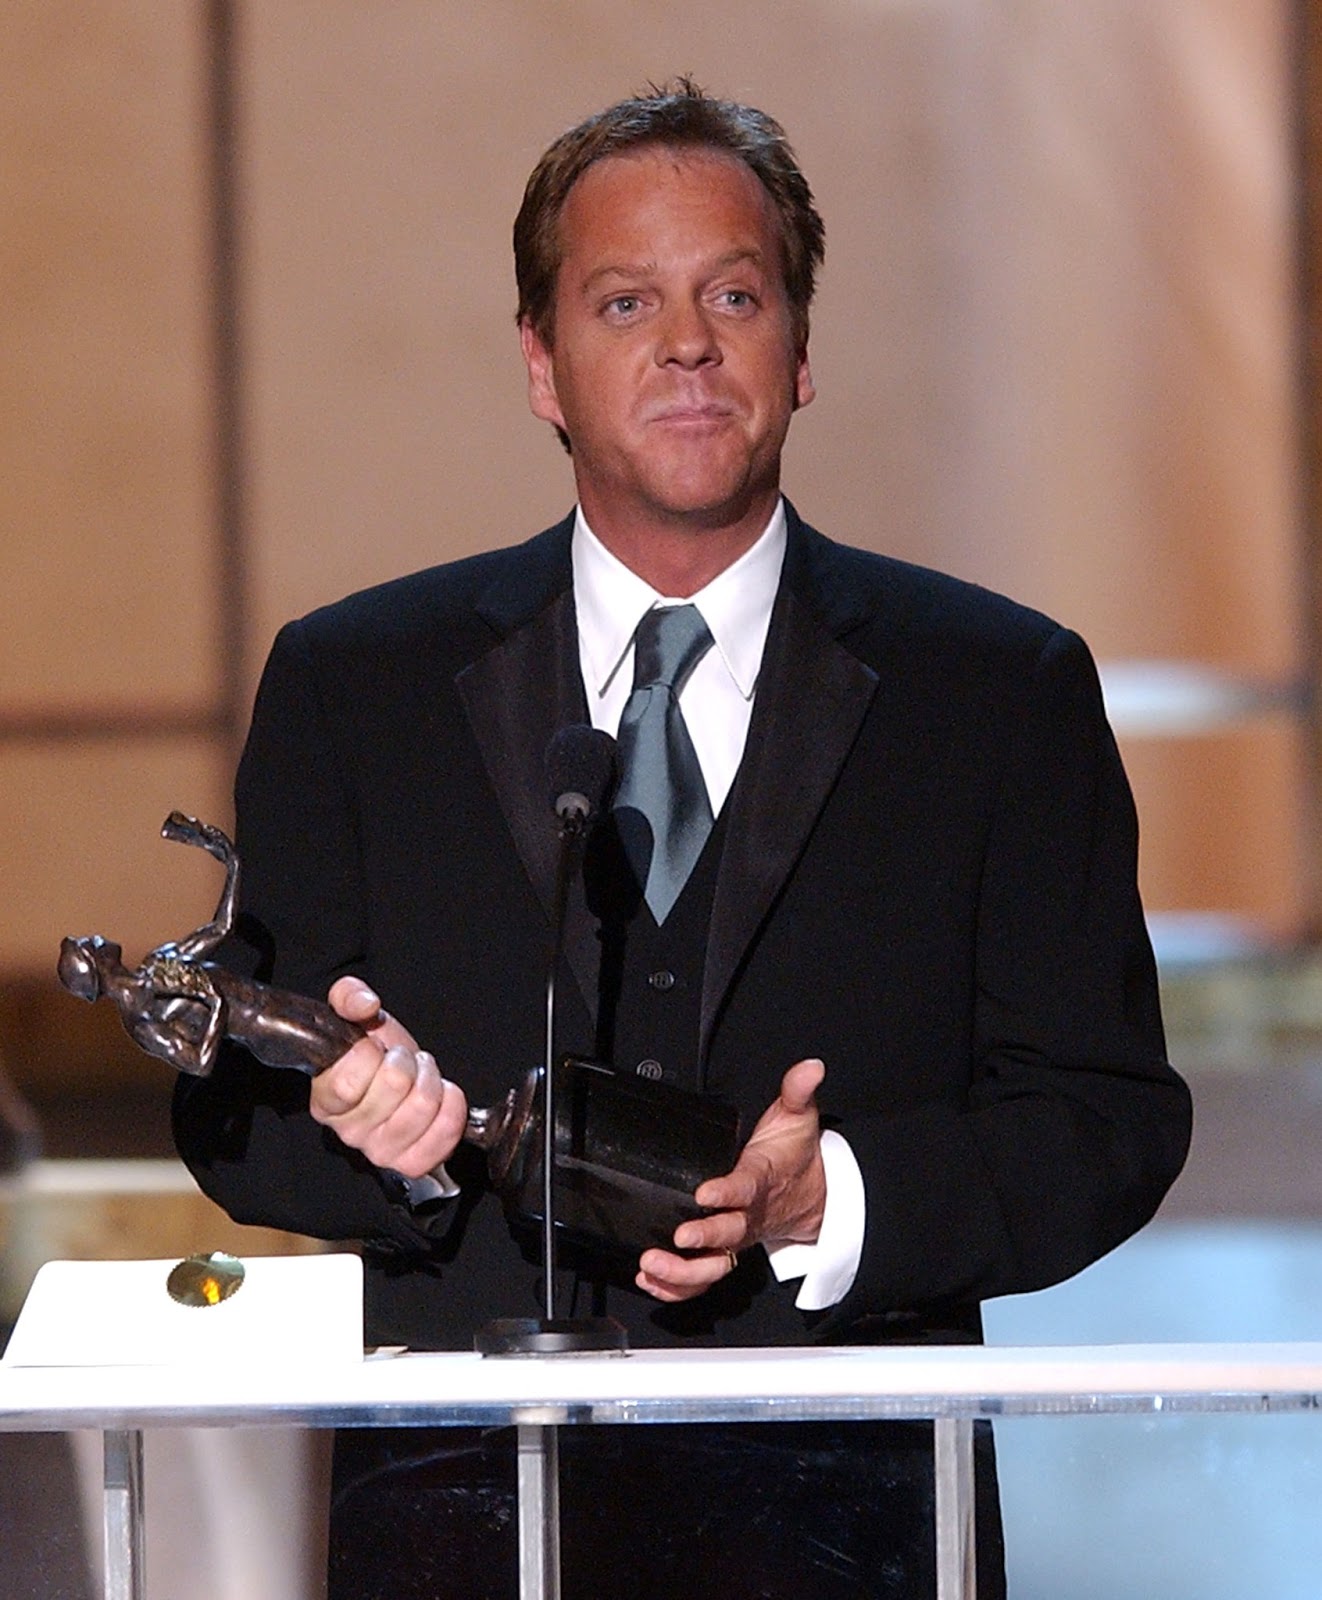 Kiefer Sutherland Photos | Tv Series Posters and Cast